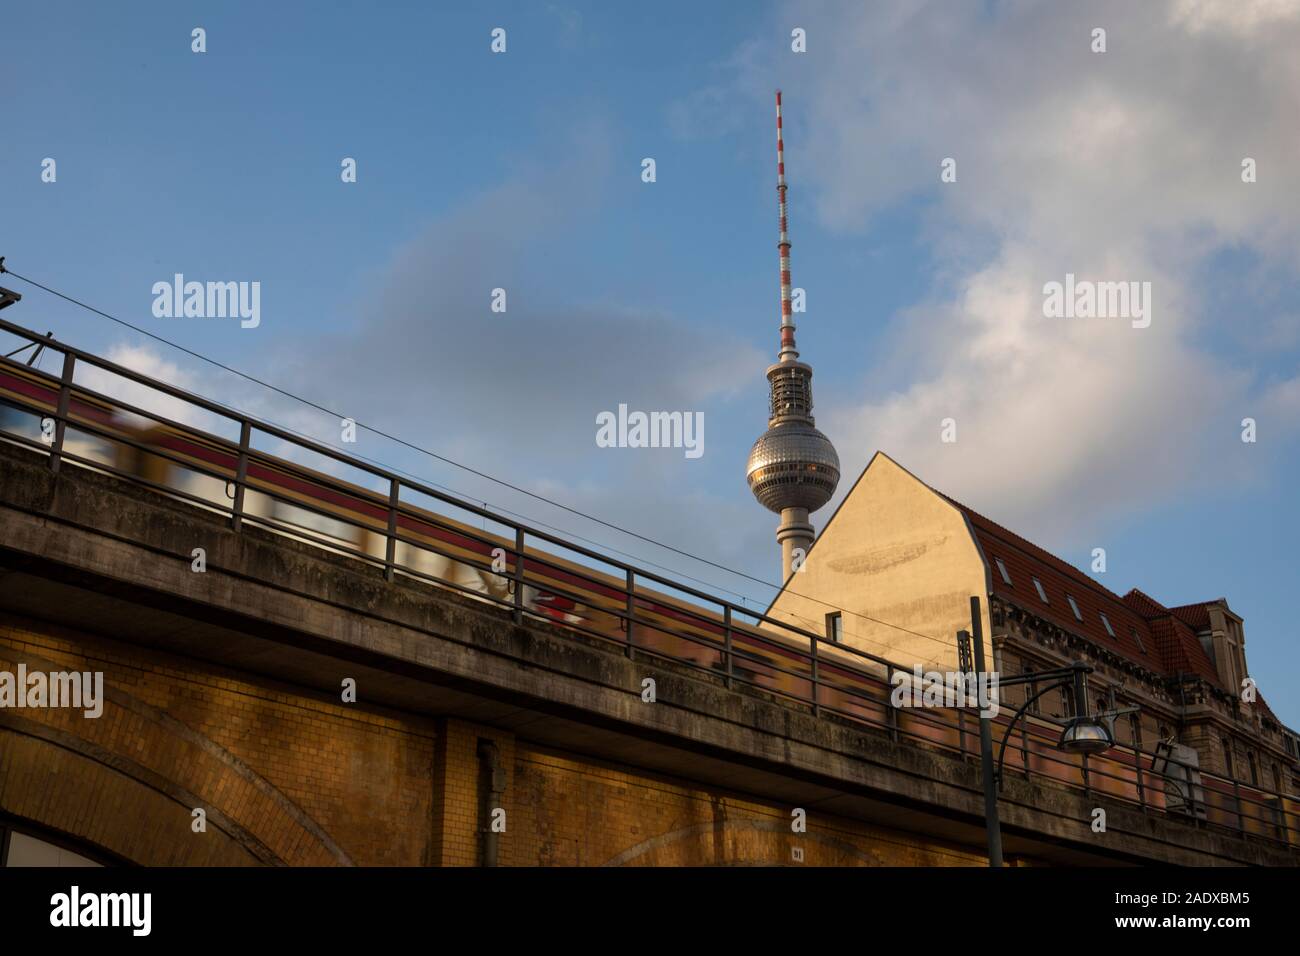 A train moving fast with the TV tower in the background Stock Photo